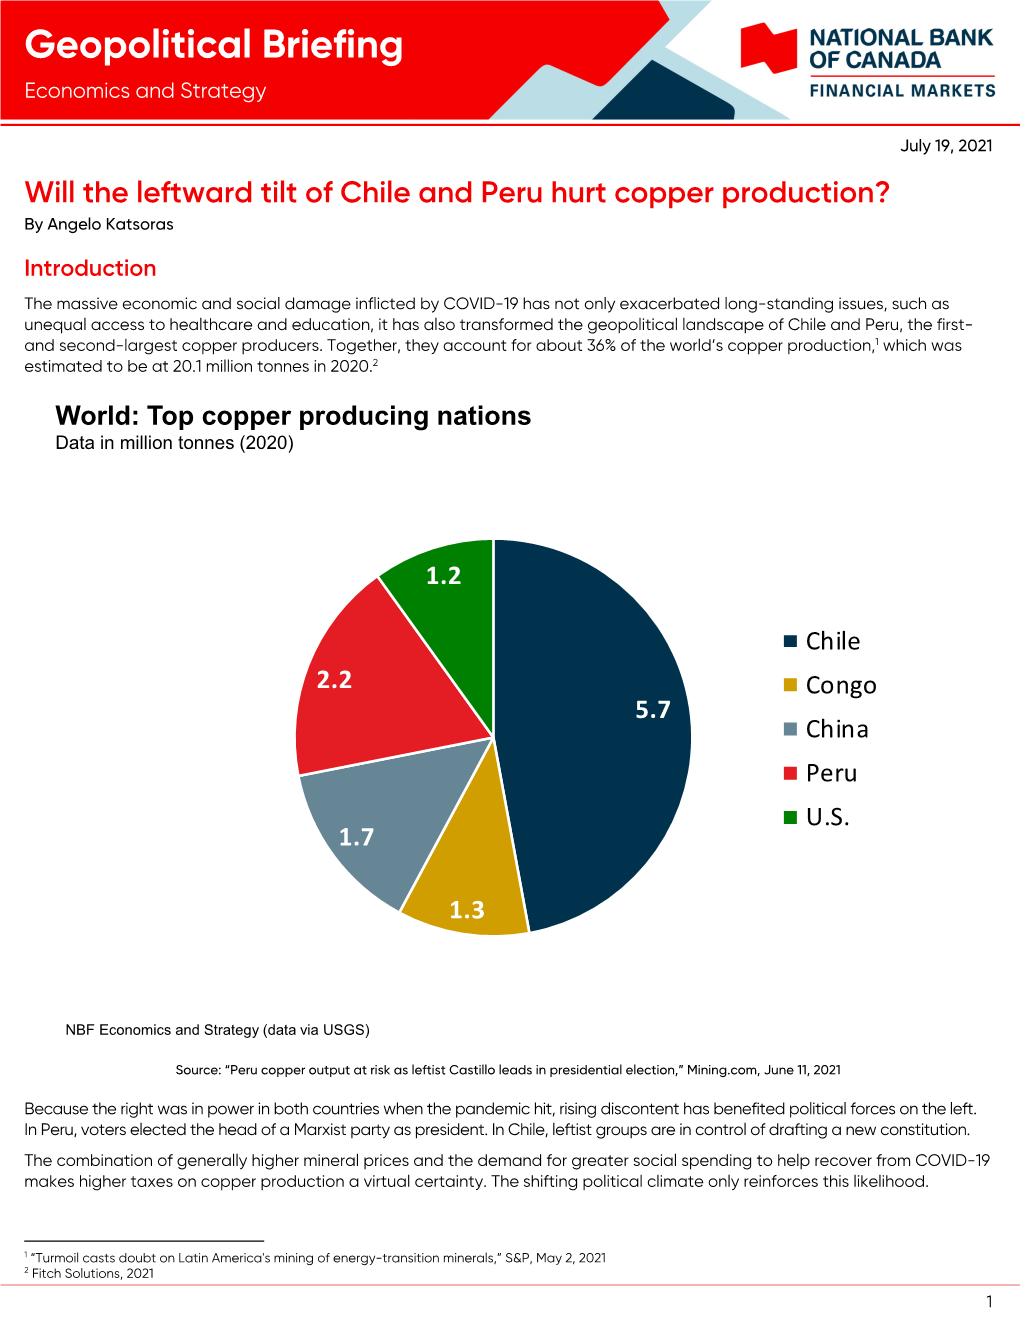 Will the Leftward Tilt of Chile and Peru Hurt Copper Production? by Angelo Katsoras